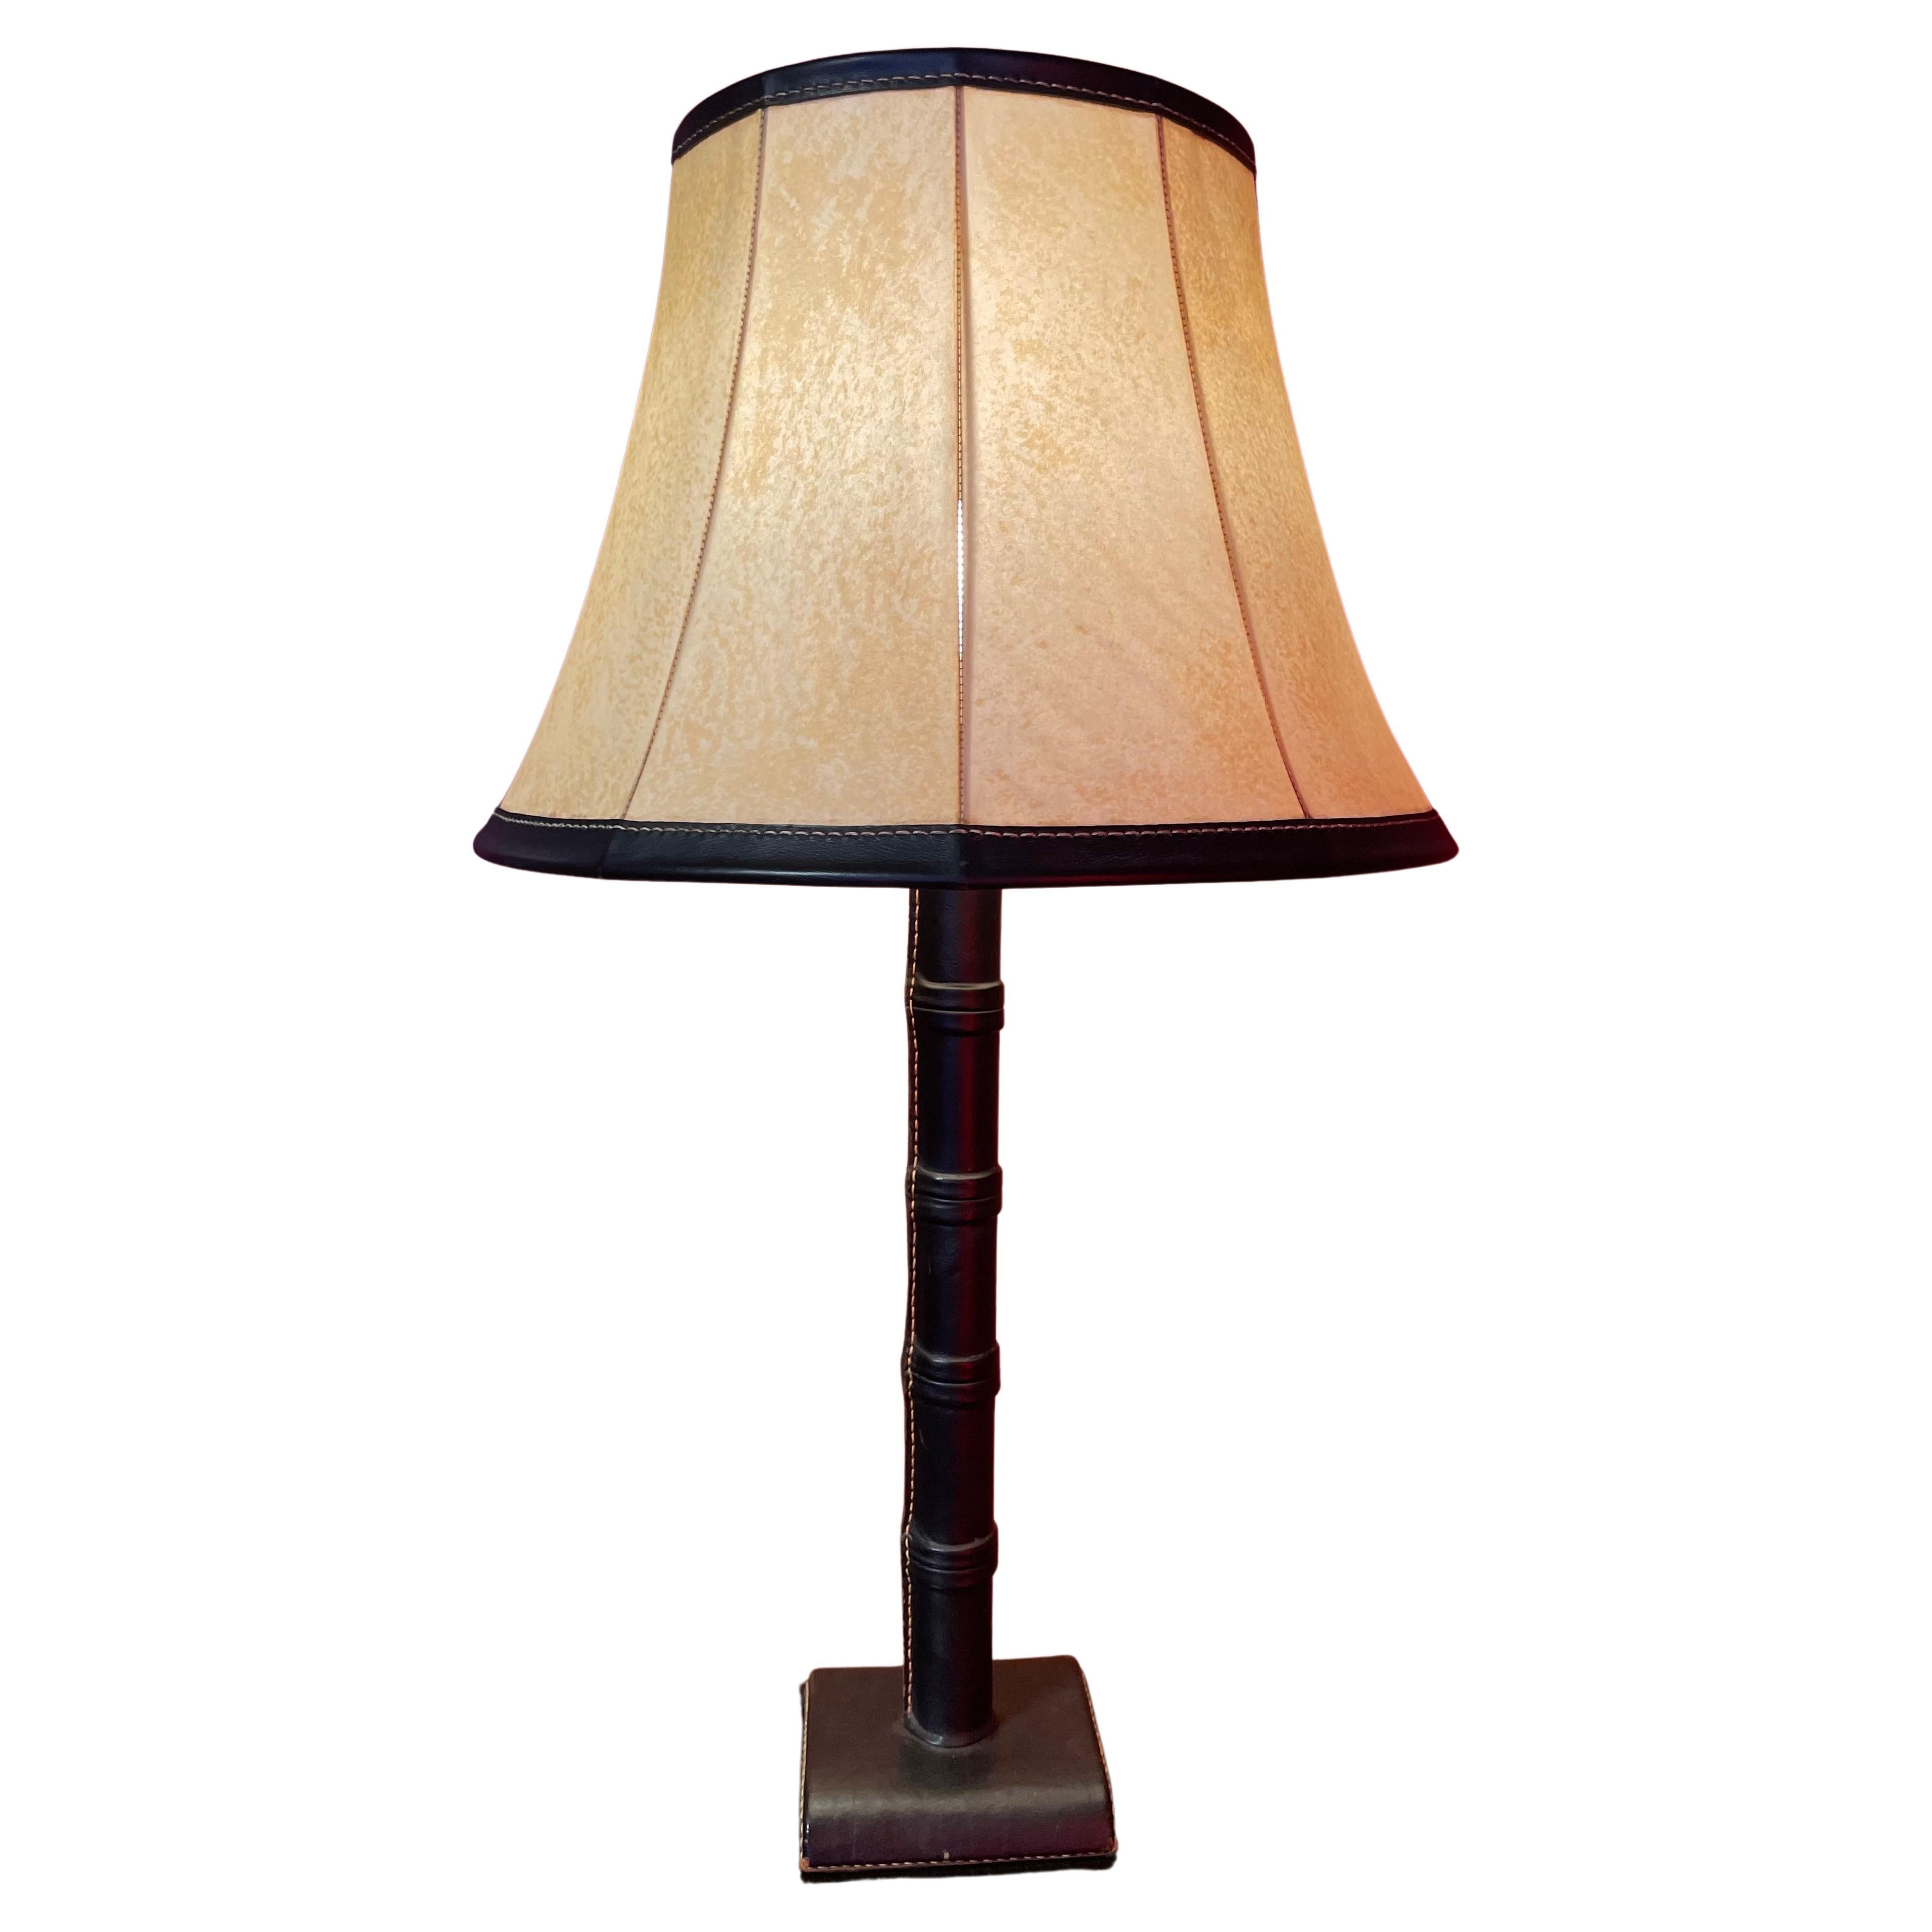 Jacques Adnet Hand Stitched Leather Table Lamp For Sale